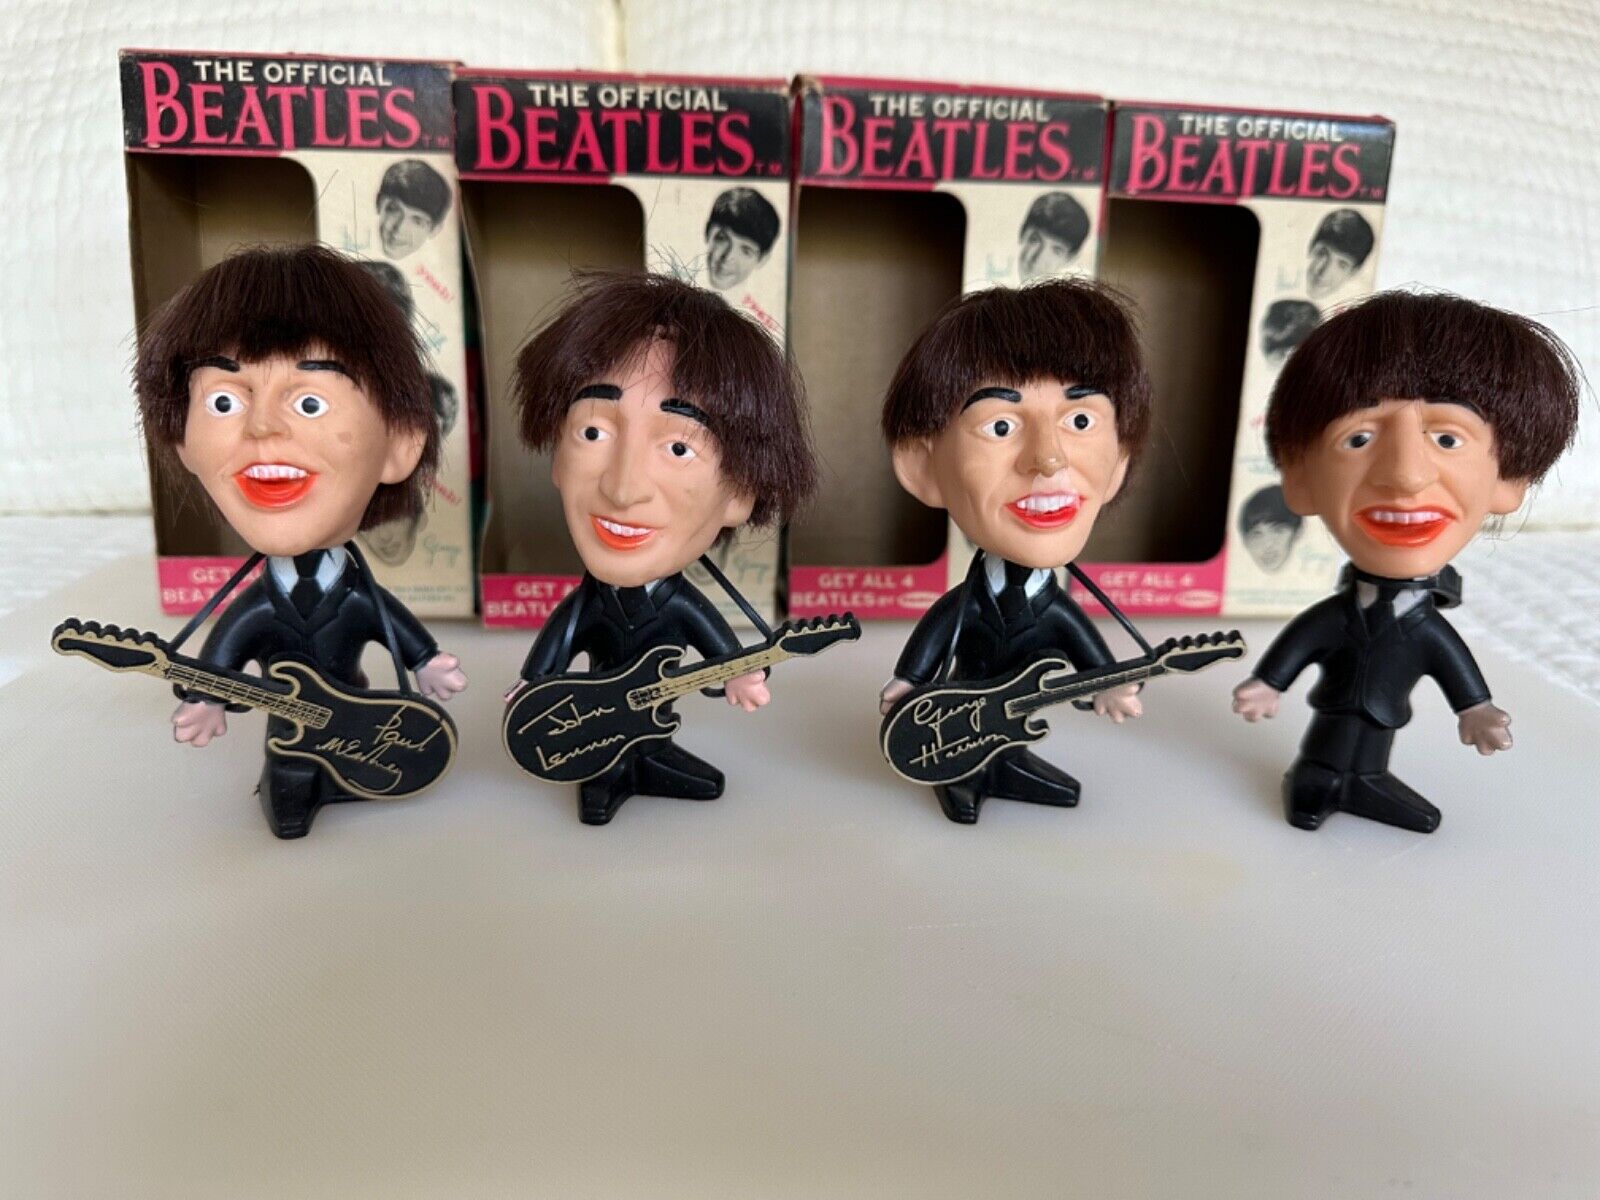 1964 remco beatles dolls in original boxes, one owner